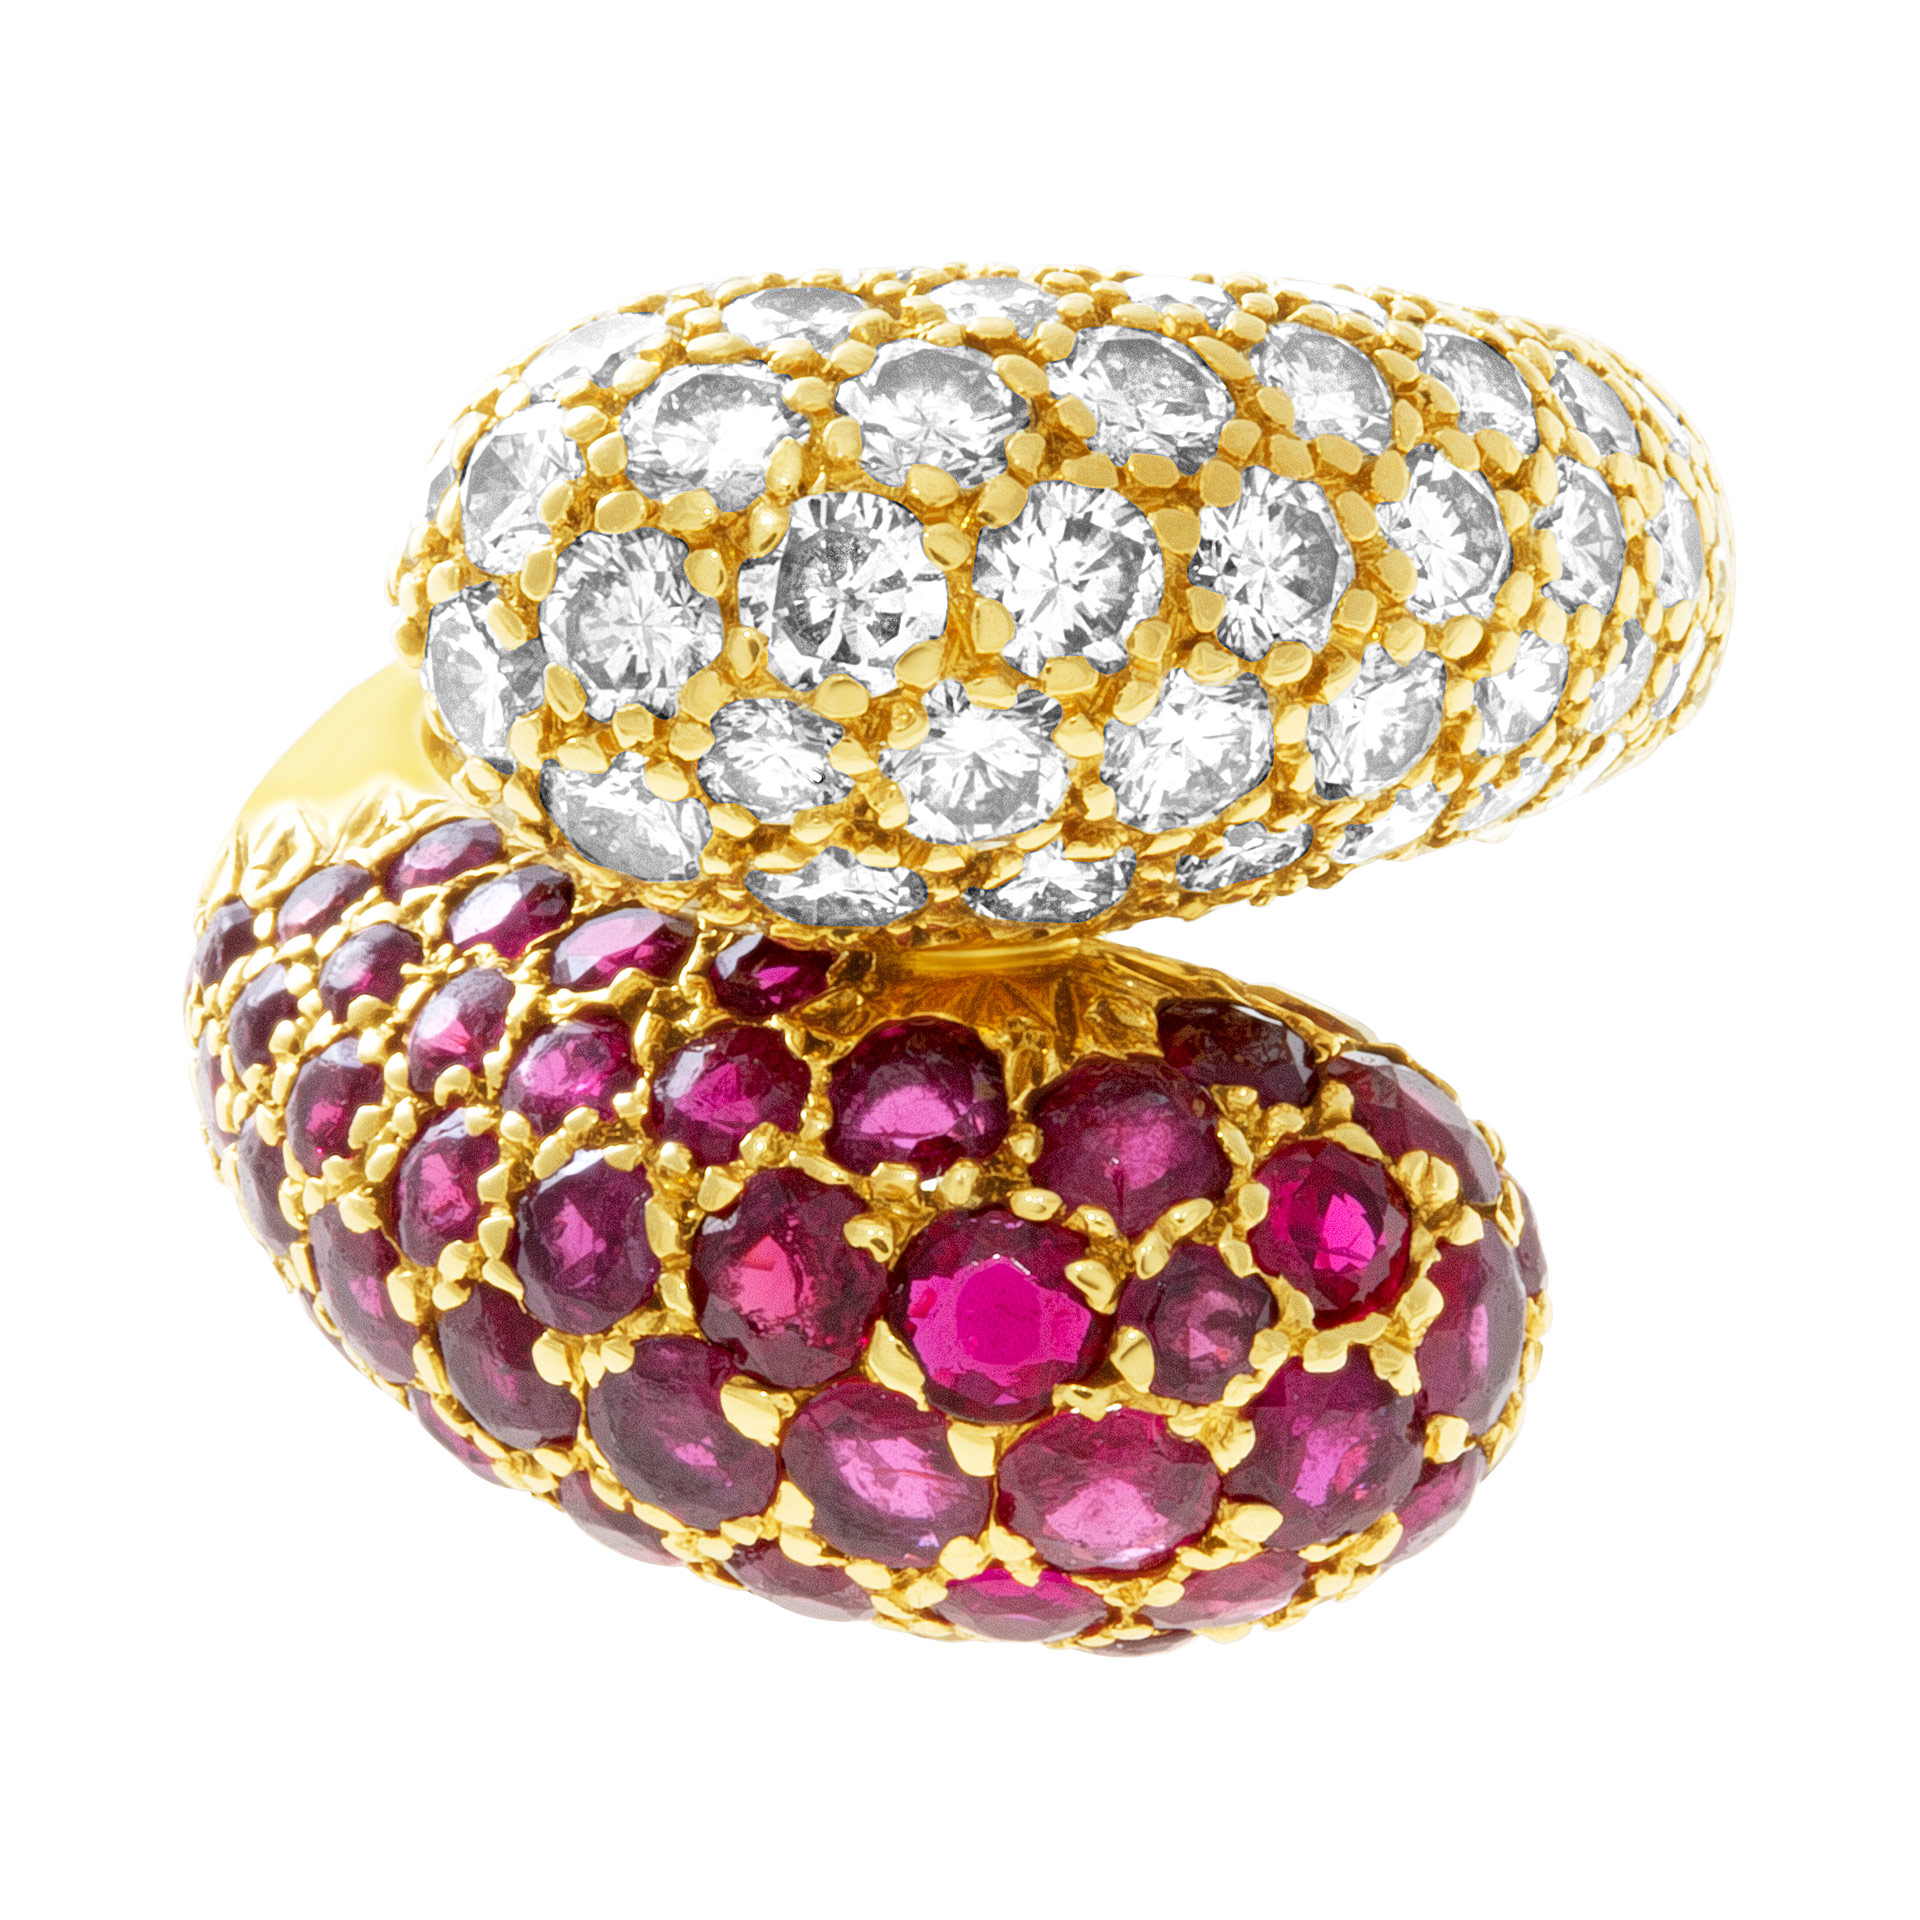 Bypass ruby & diamond ring in 18k yellow gold. 2.5cts in diamonds, 3.00cts rubies. Size 3